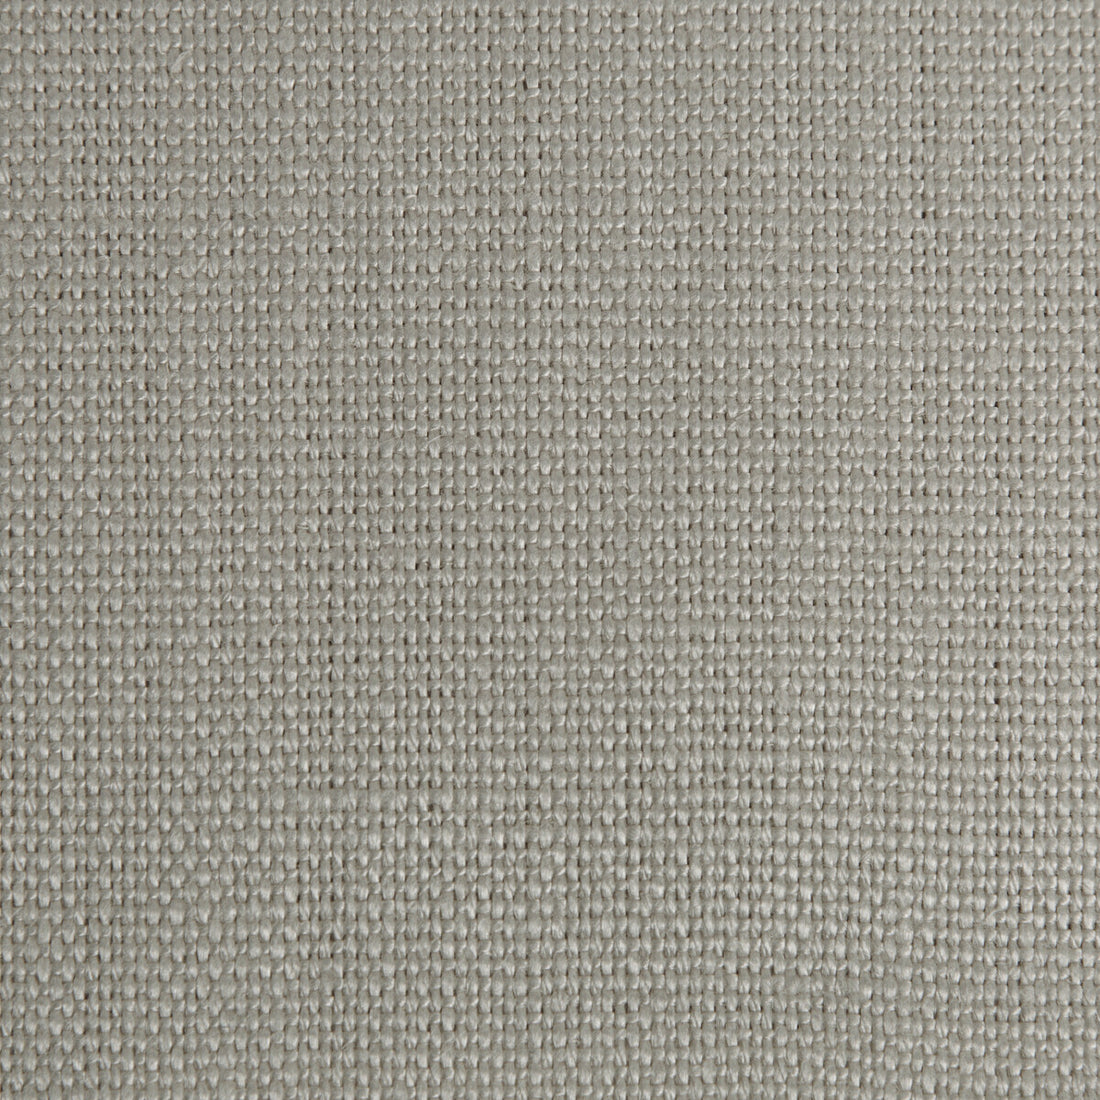 Crissie fabric in linen color - pattern 35977.2111.0 - by Kravet Design in the Barry Lantz Canvas To Cloth collection